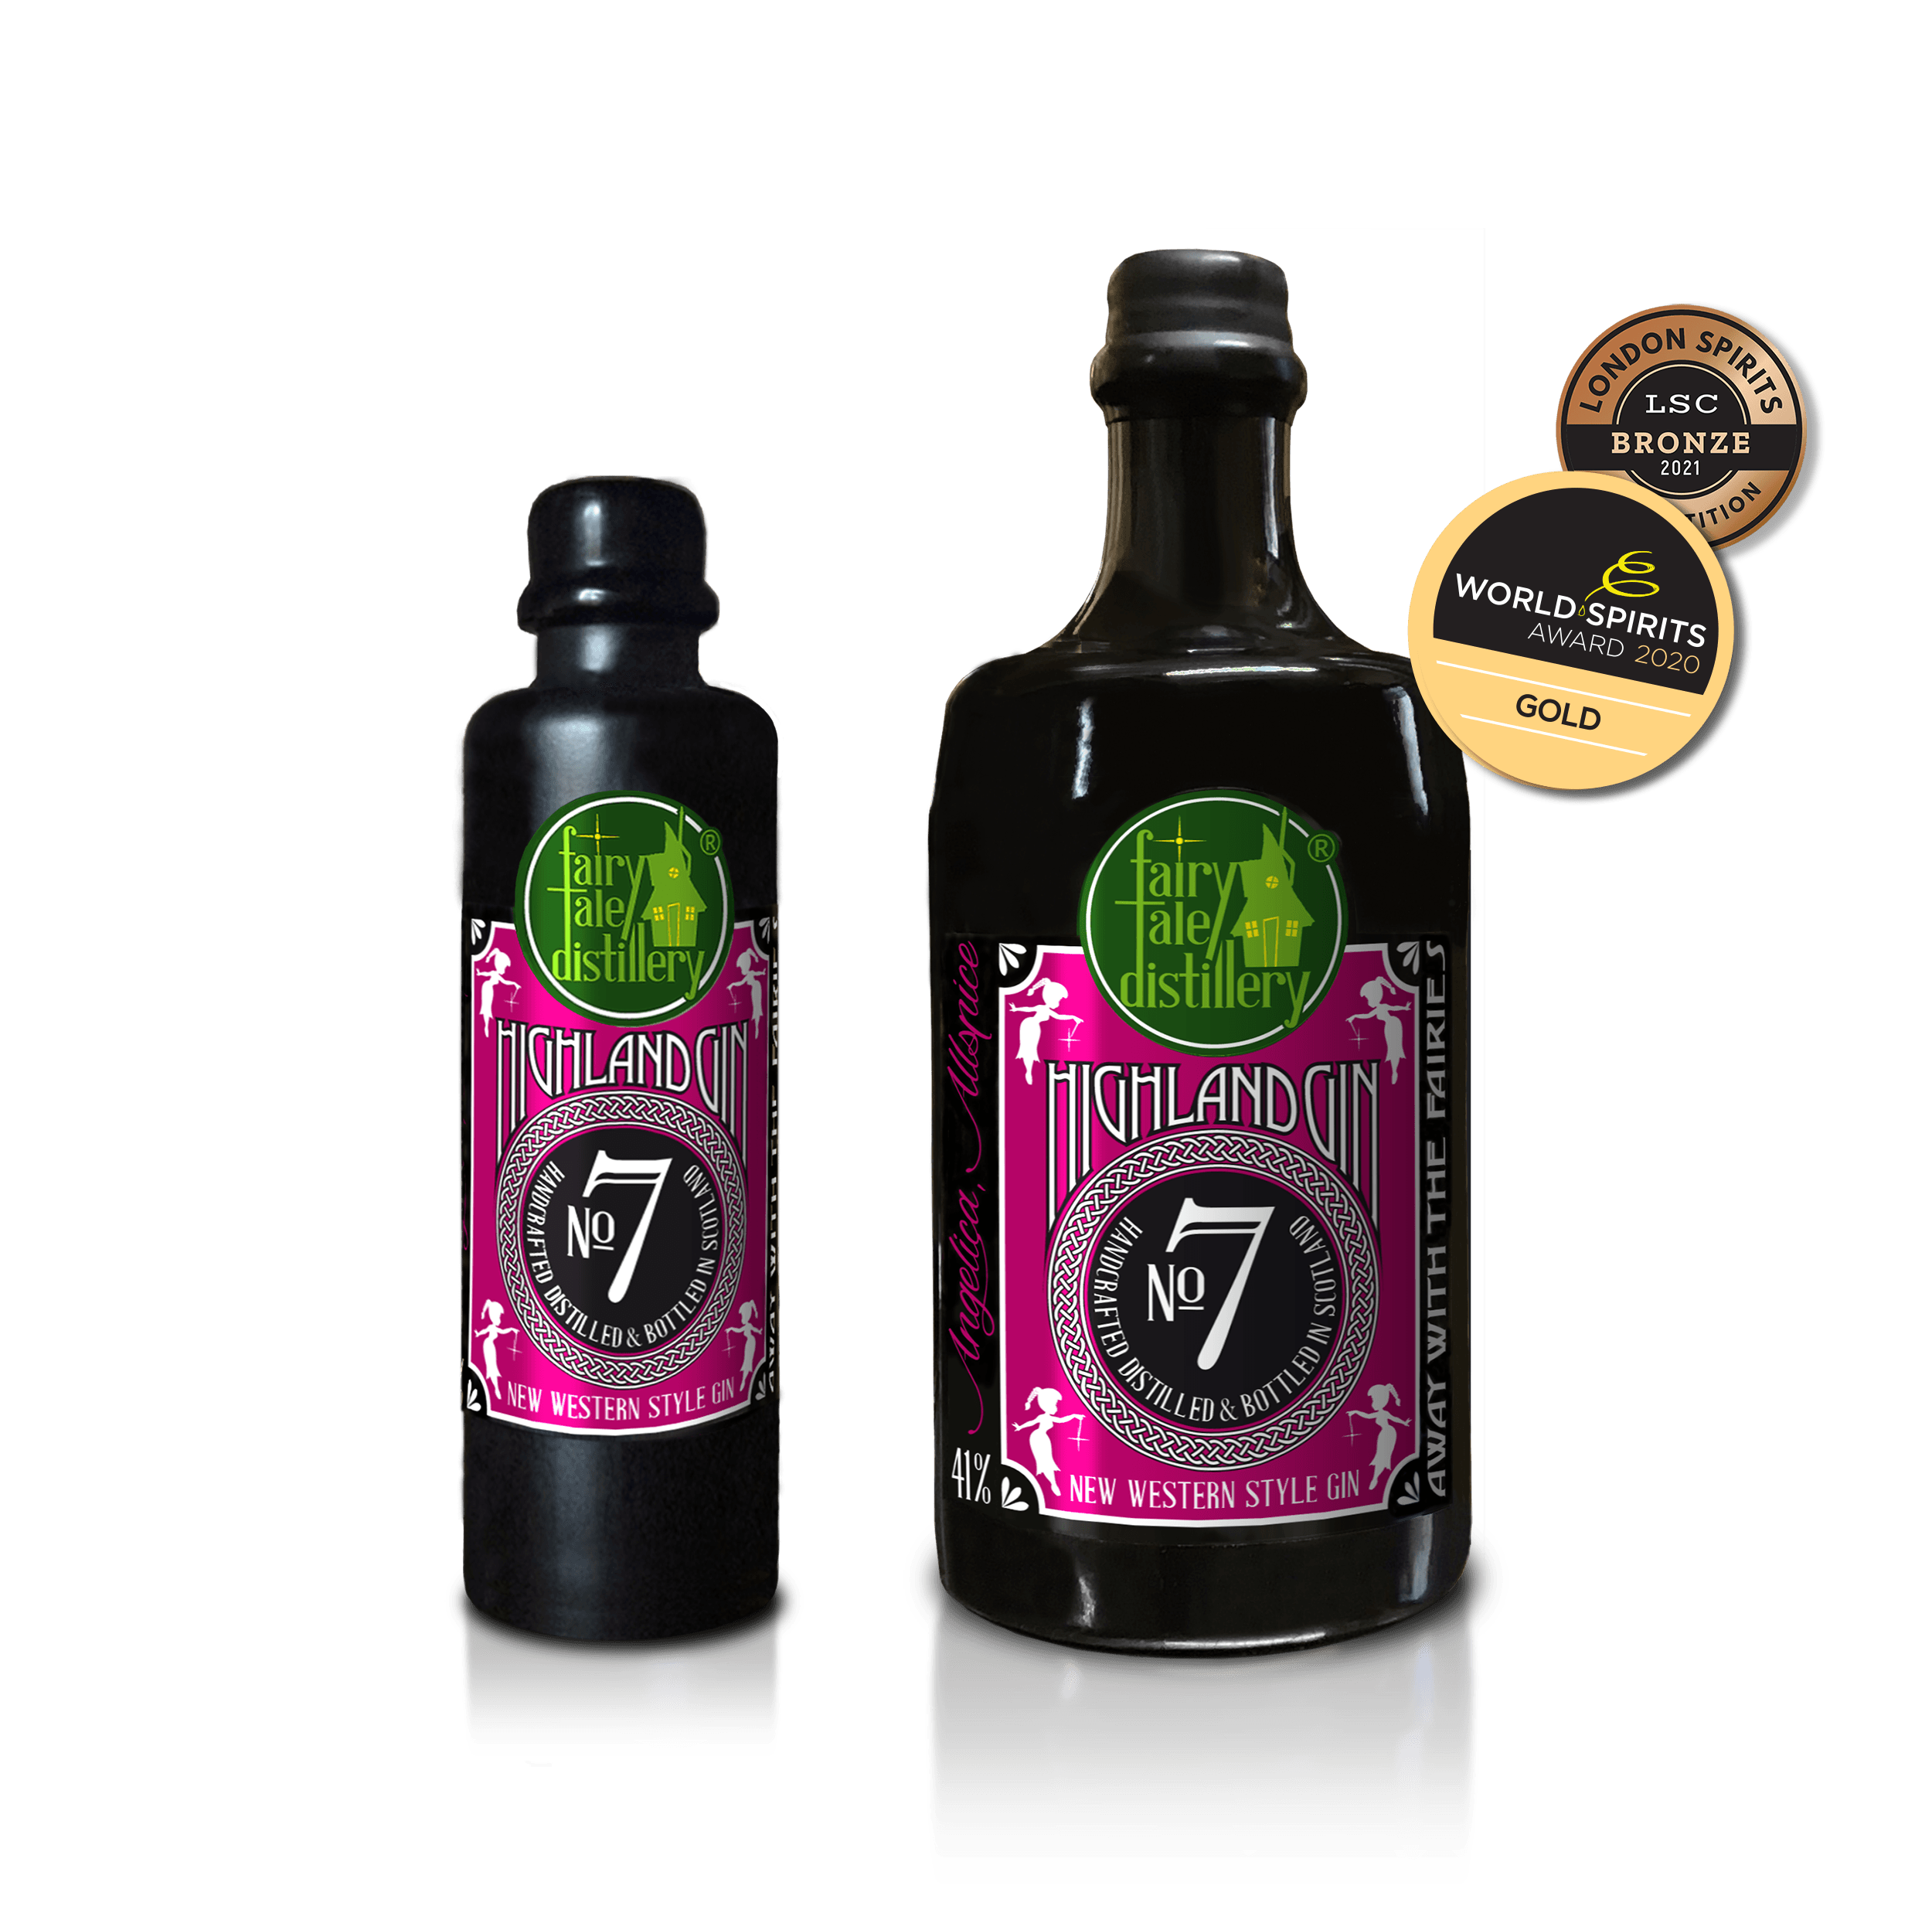 No 7 New Western Style Highland Gin bottle from Fairytale Distillery with World Spirits Award 2020 Gold - London Spirits Competition 2021 Bronze